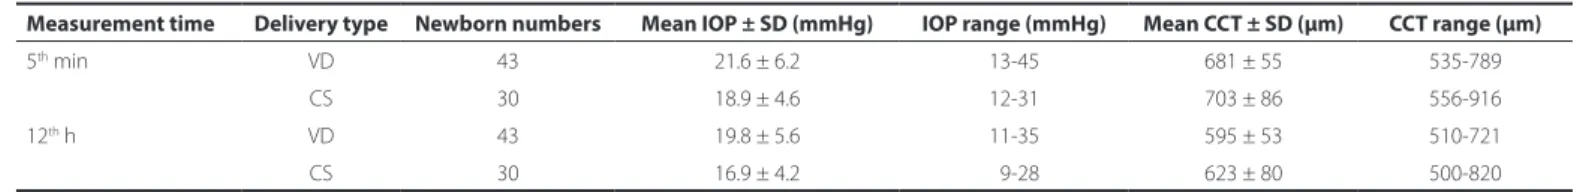 table 1. IoP and cct values of the Vd- and cS-delivery groups at the ifth minute and at the 12 th  hour of the postpartum period